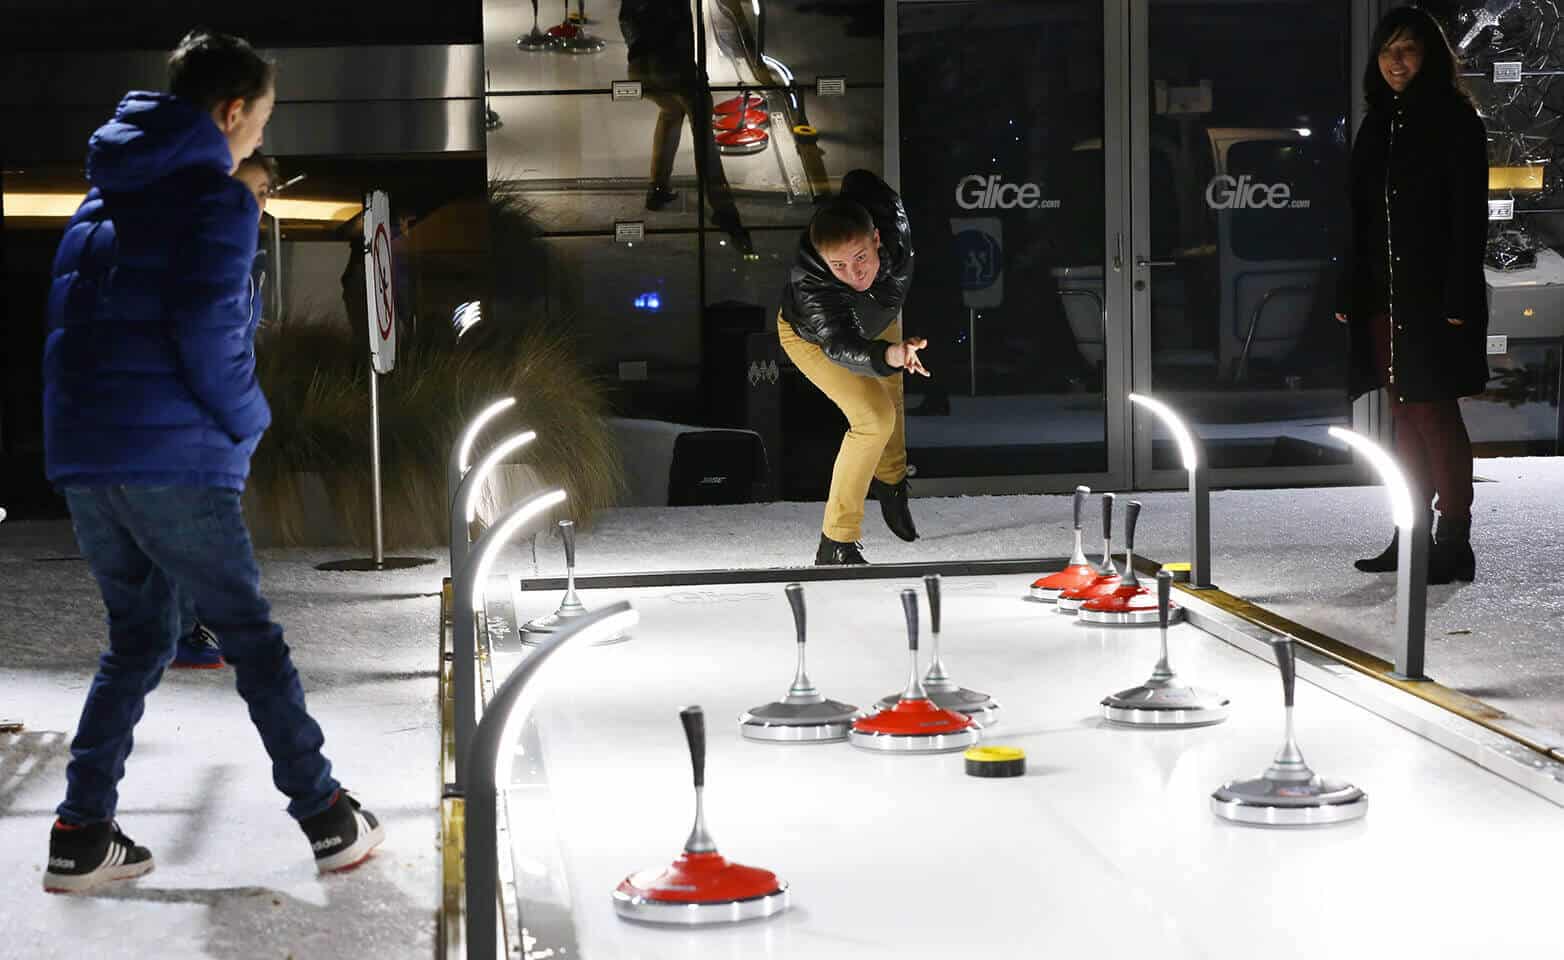 Eisstock curling game on synthetic curling lane